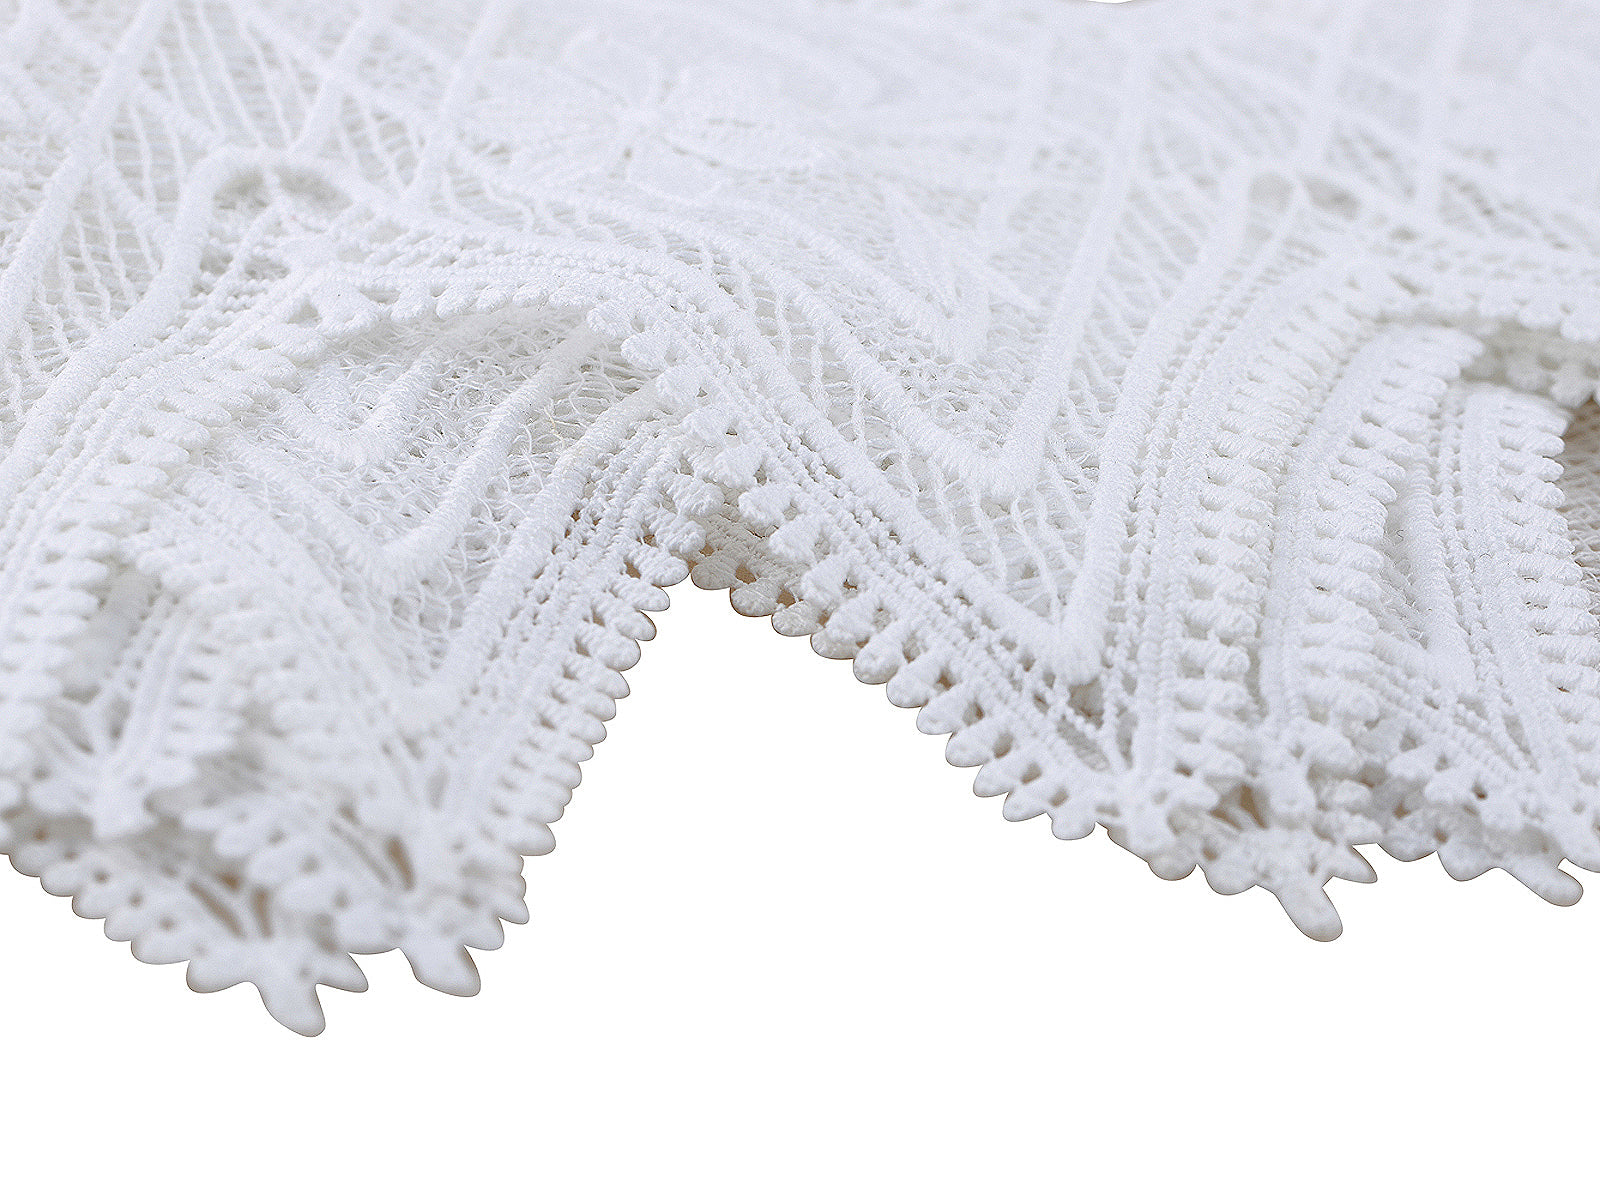 Beautiful Embroidered Broad White Guipure Lace Trim